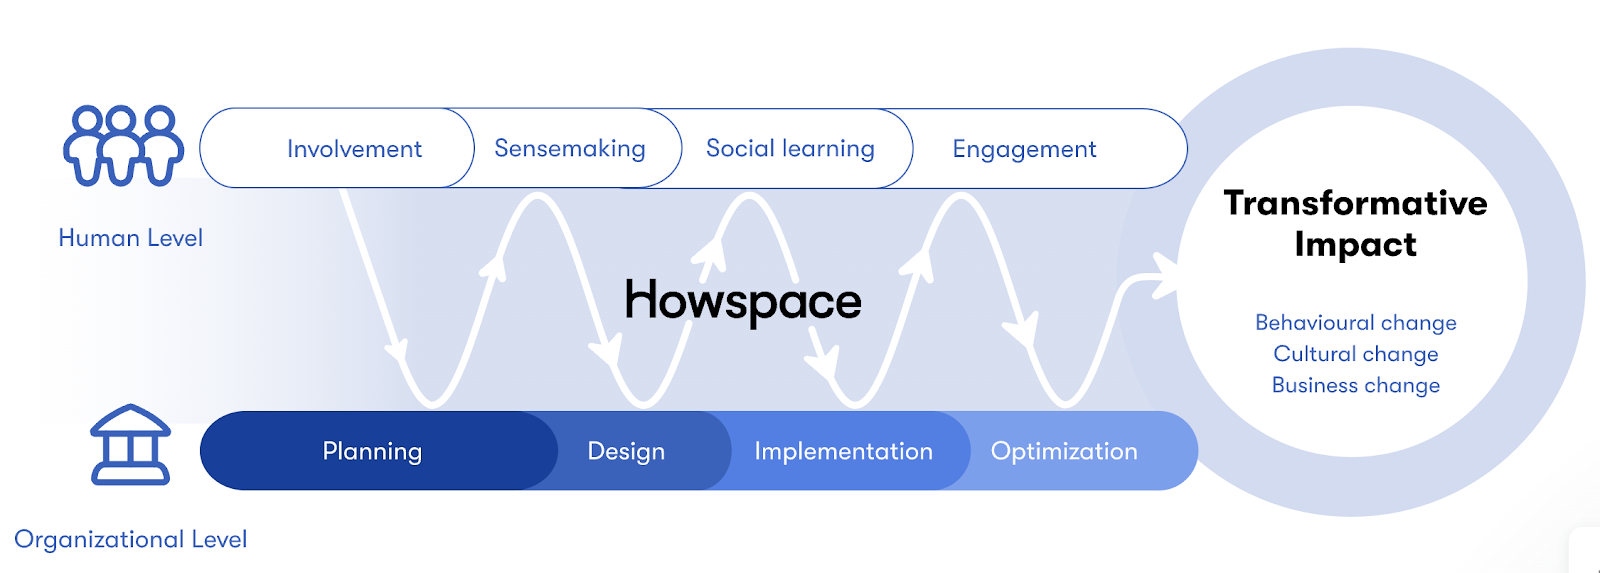 howspace